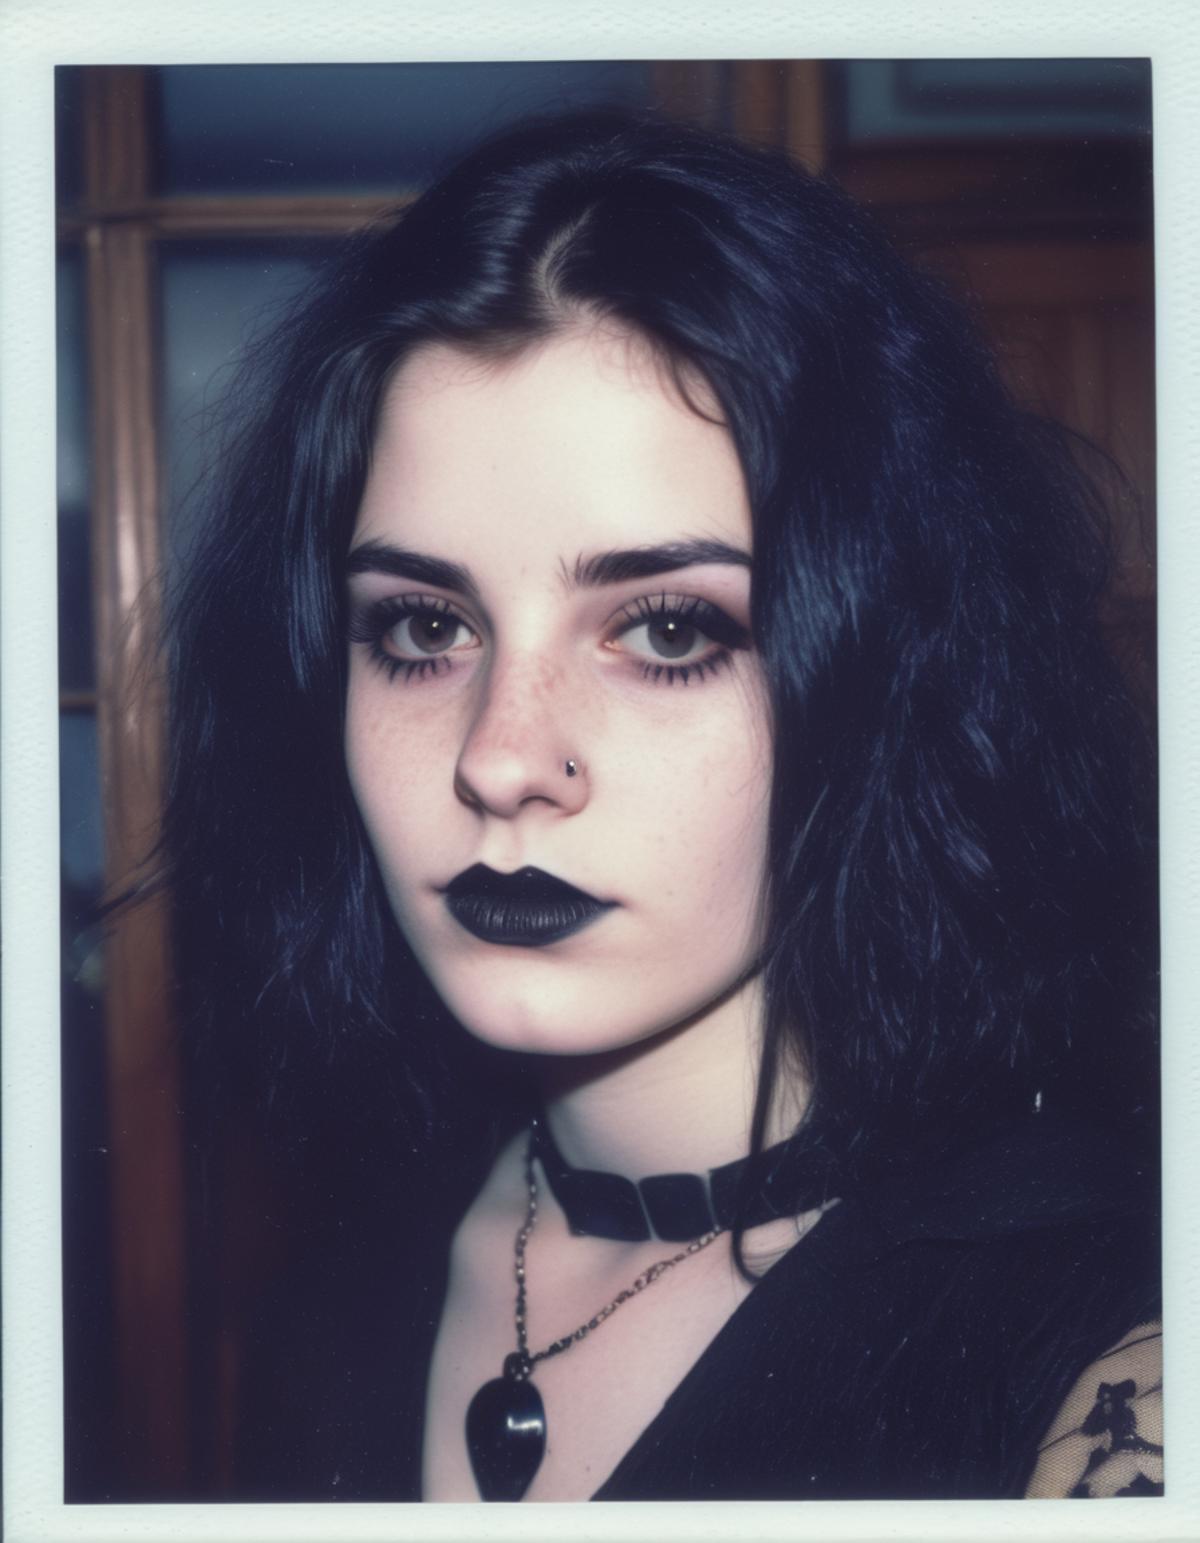 A young woman with dark hair and lipstick looking into the camera.